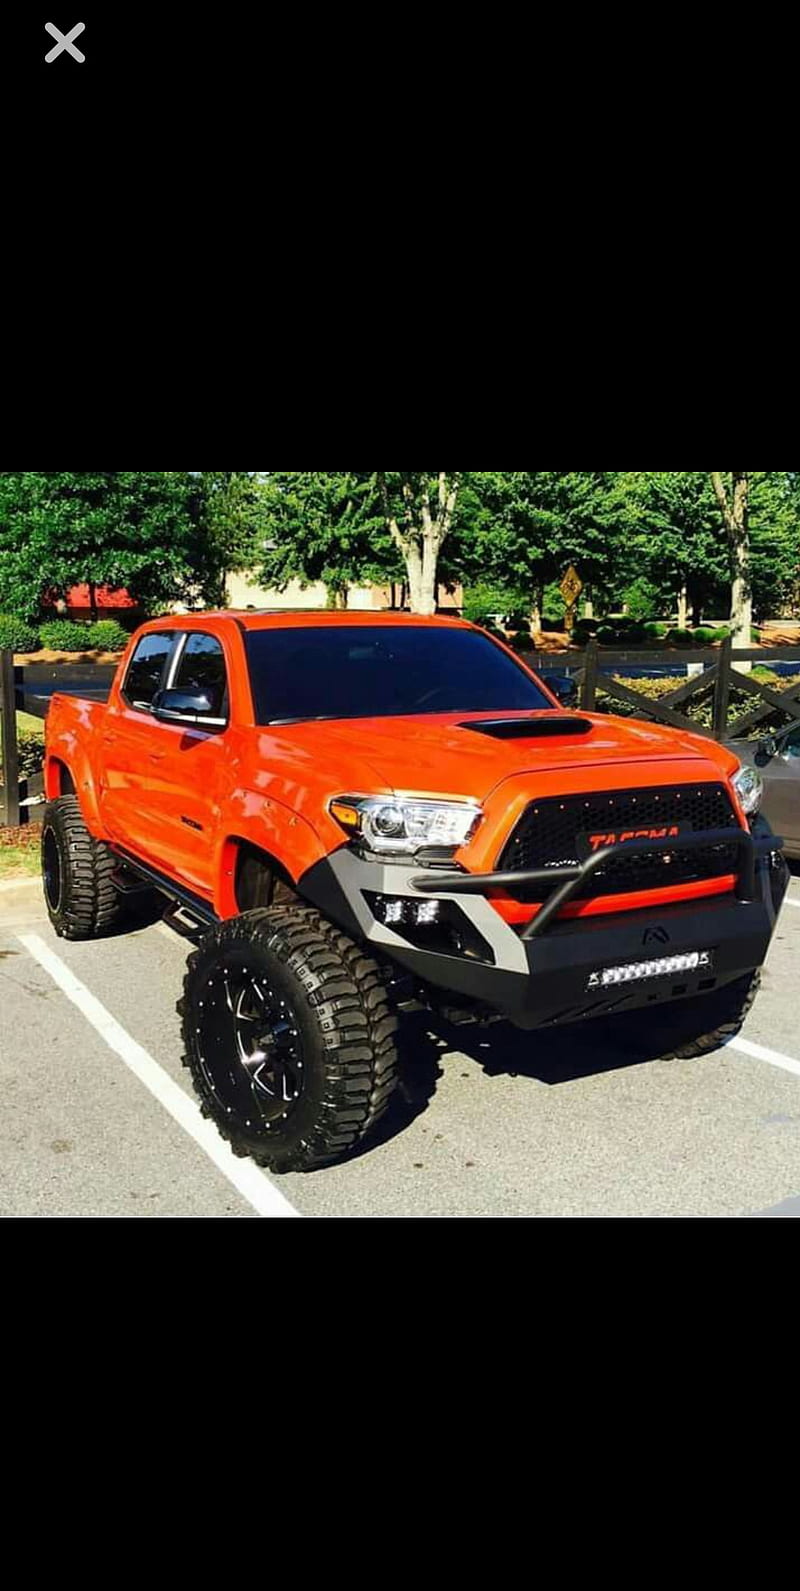 Toyota Tacoma Truck Hd Mobile Wallpaper Peakpx